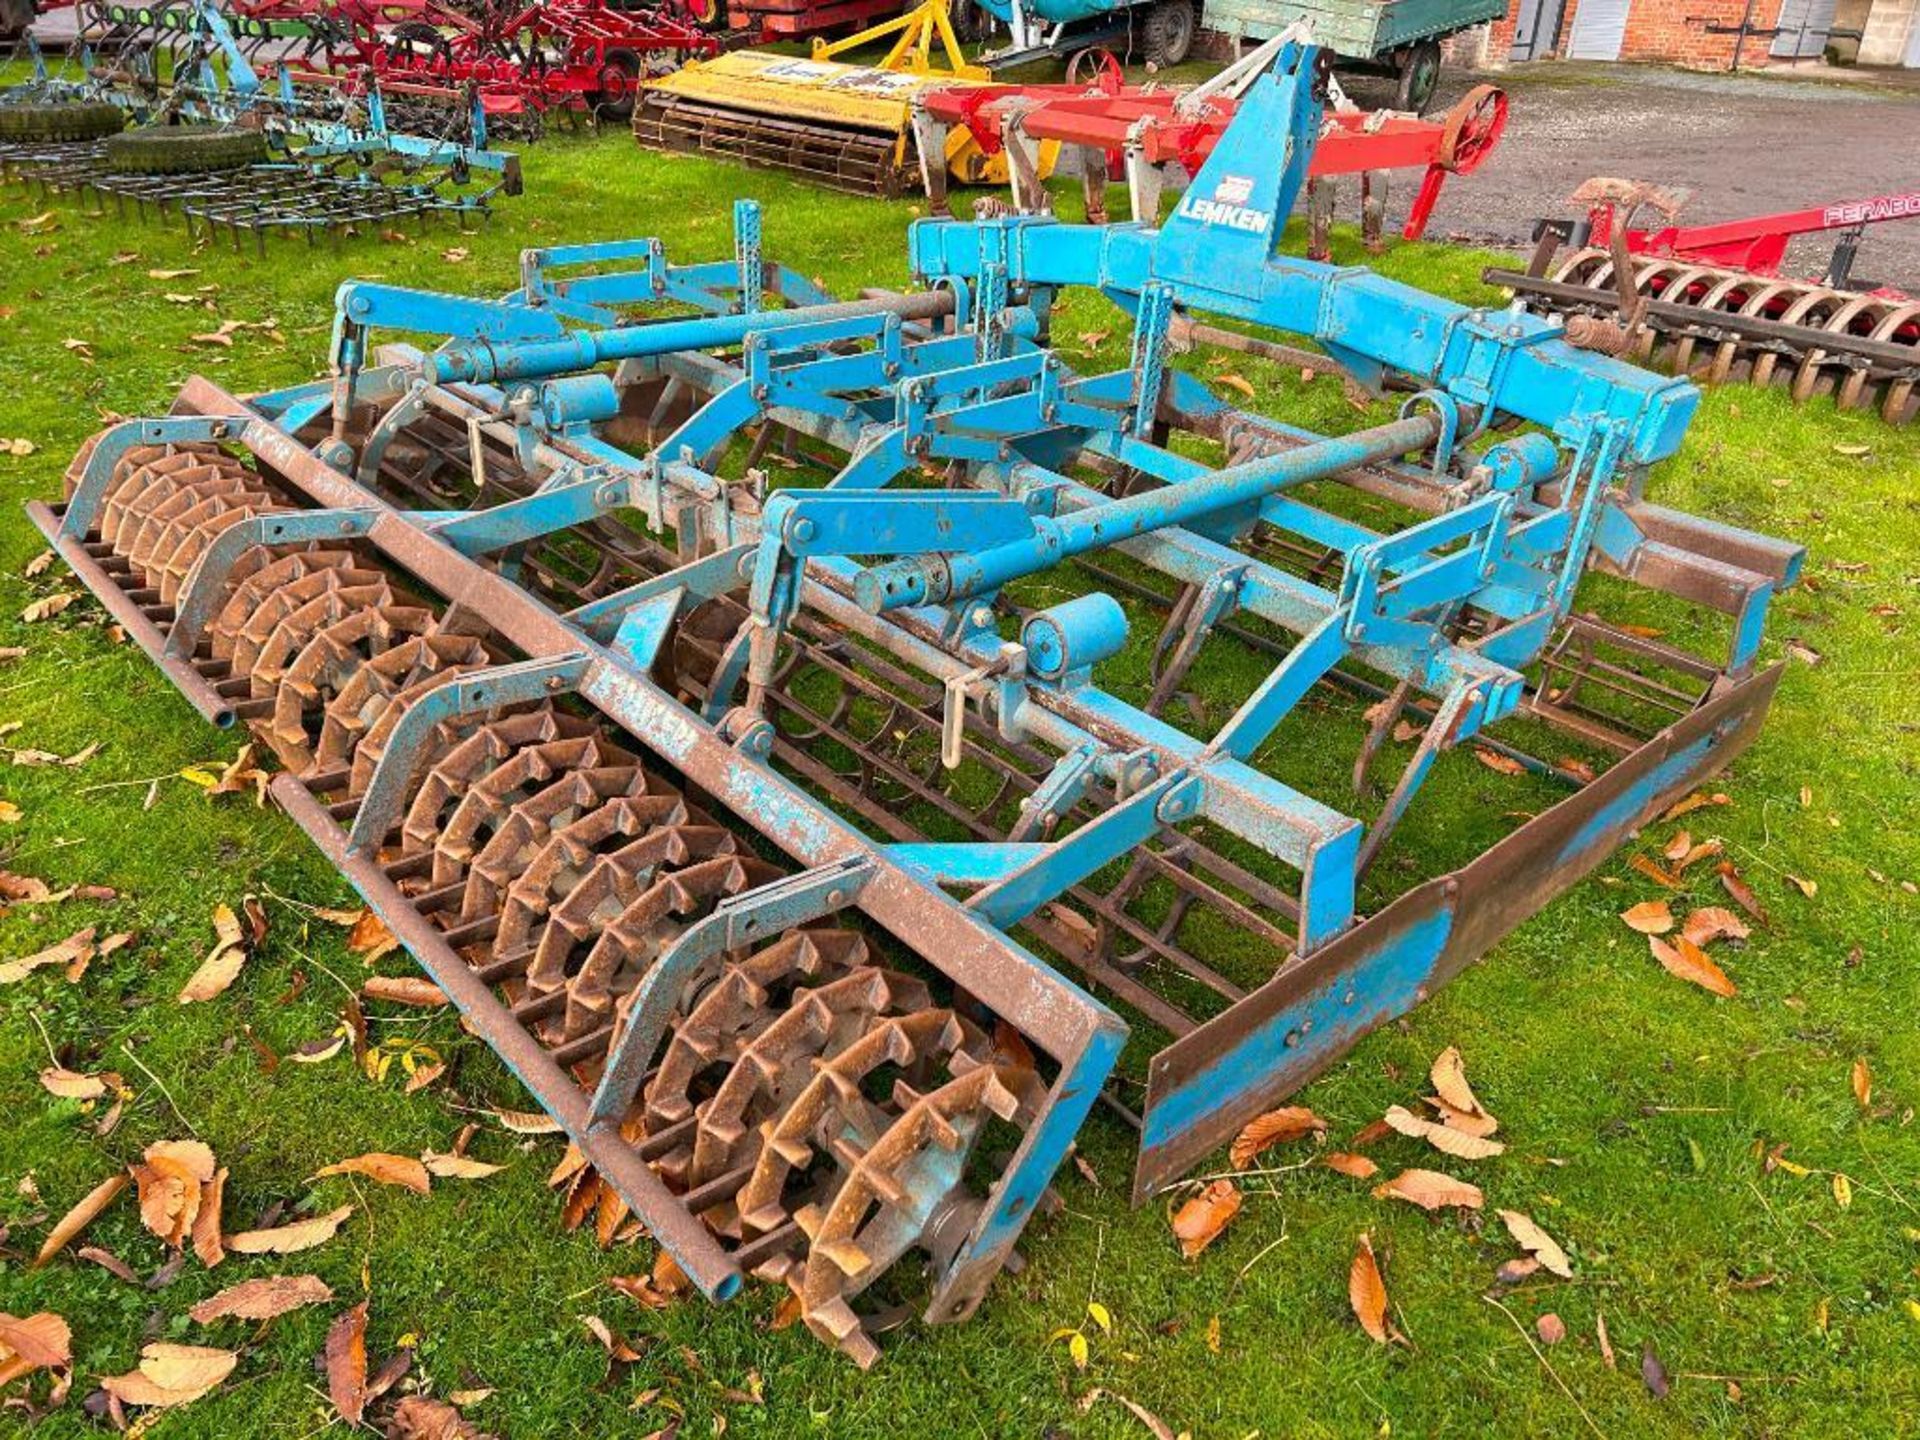 1990 Lemken S300 3m Terra Tilth c/w set of brand new tines. Serial No: 164 577.  Manual in the offic - Image 6 of 9